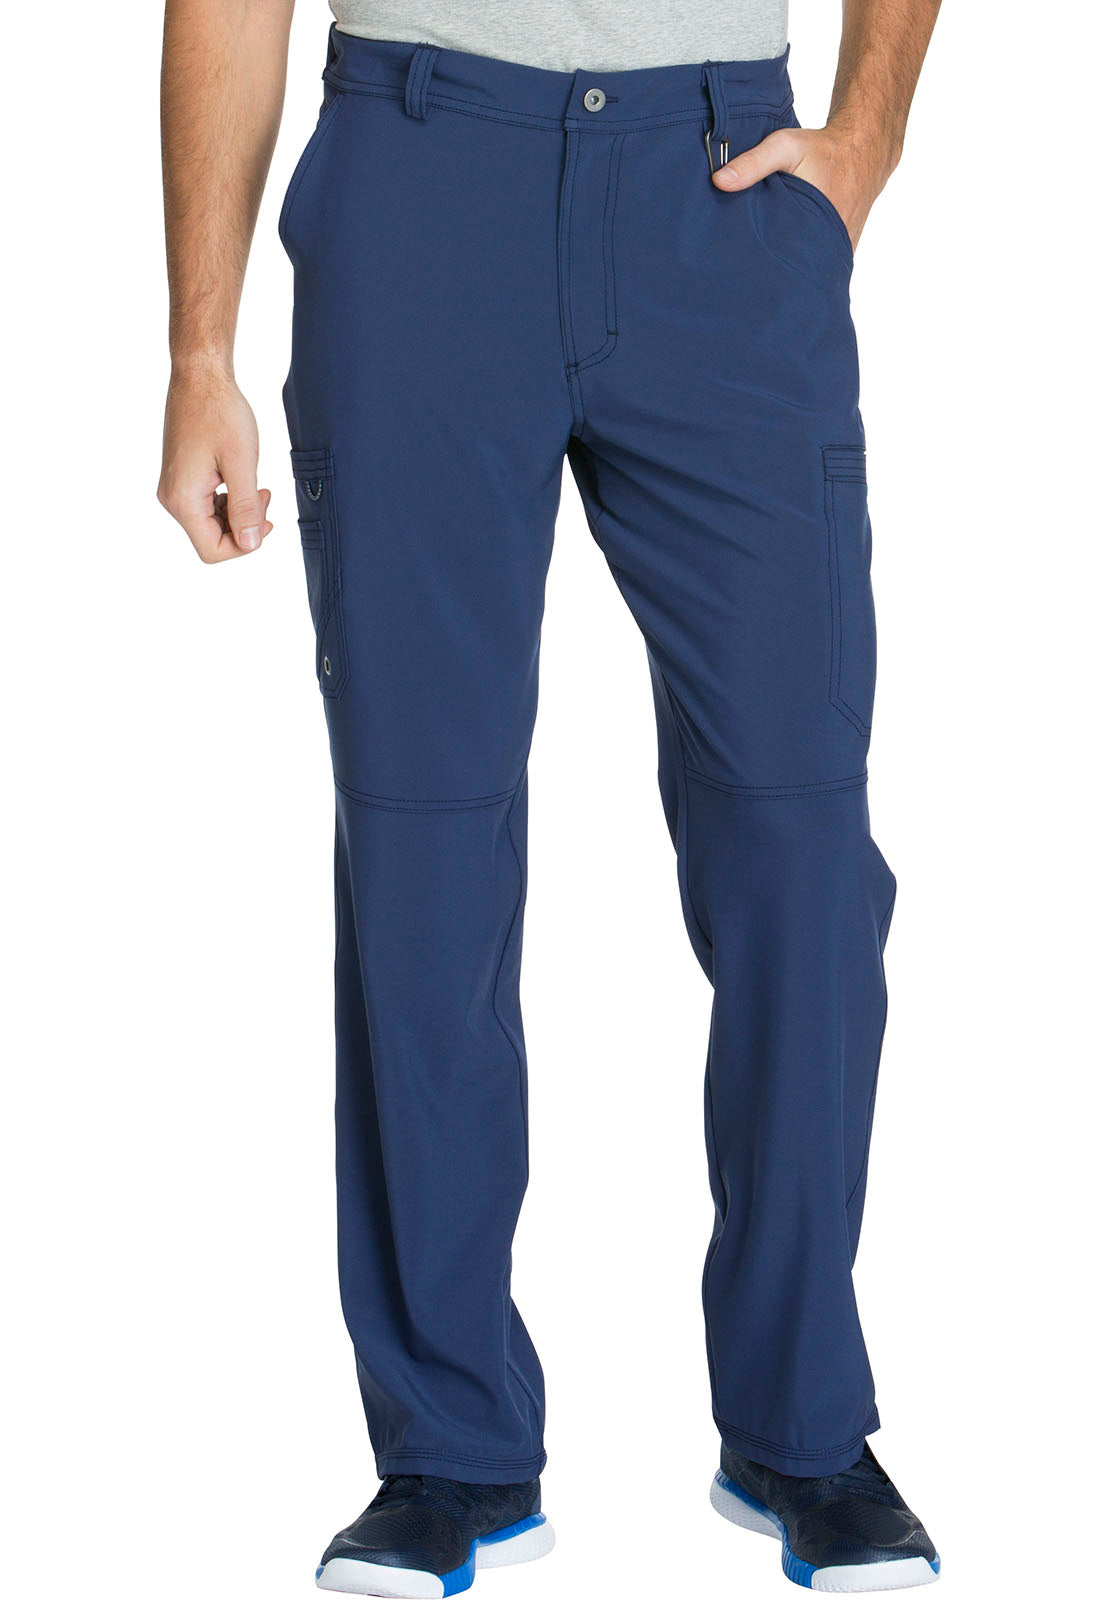 CK200A - Men's Infinity Fly Front Pant